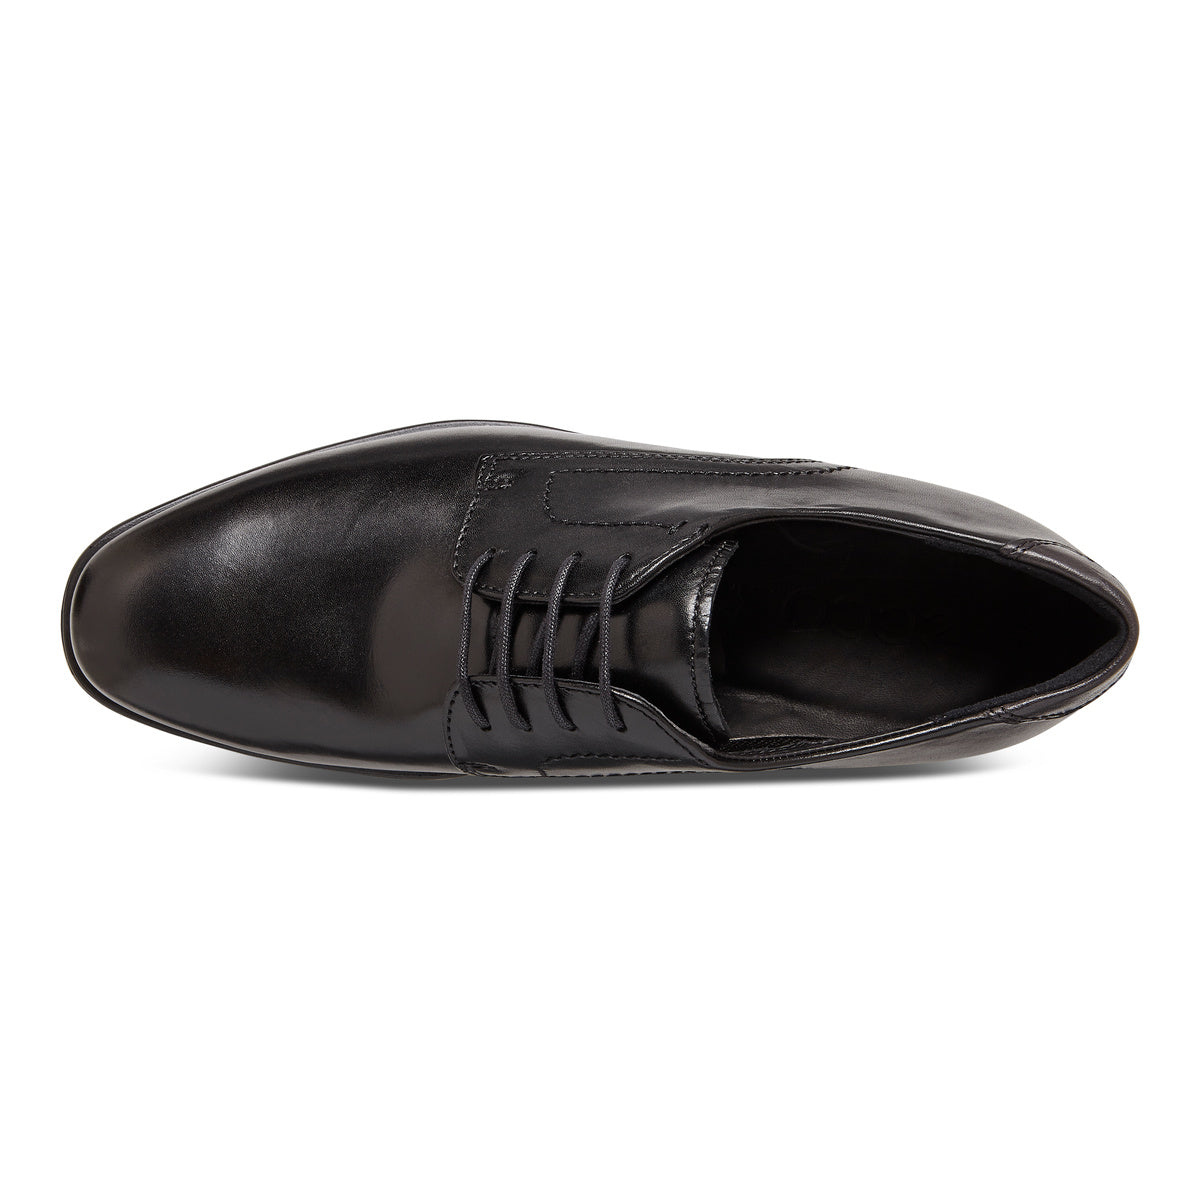 Ecco Me’n Oxford Dress Shoes Loafers Lace Up Black Leather